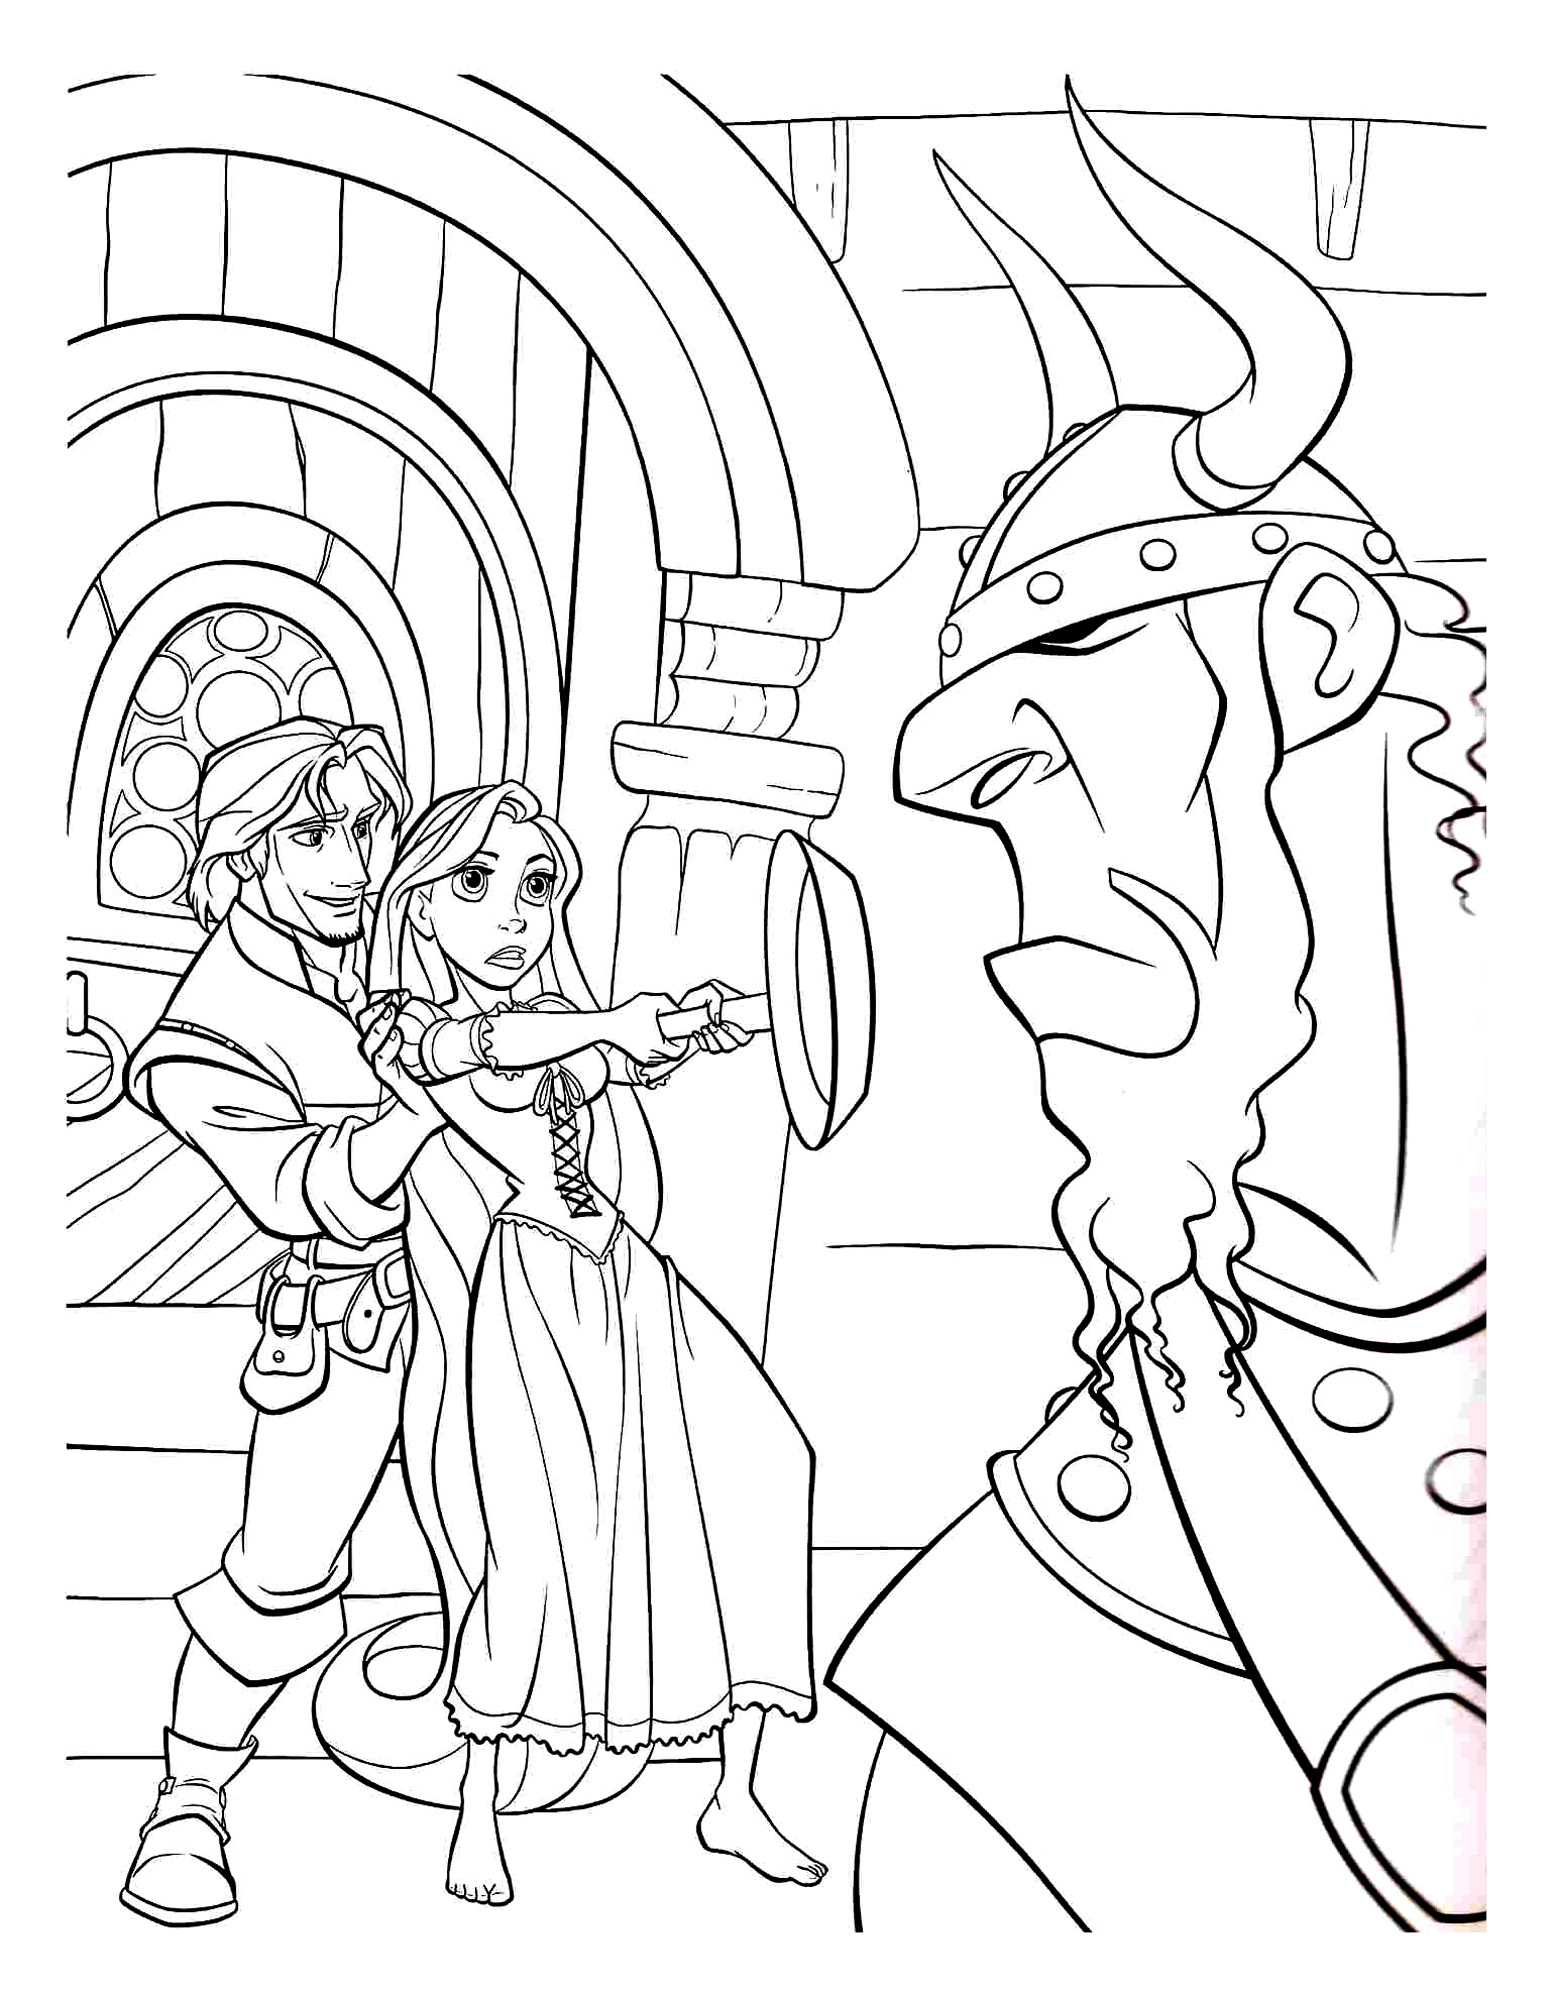 Rapunzel protects Flynn rider Coloring Page